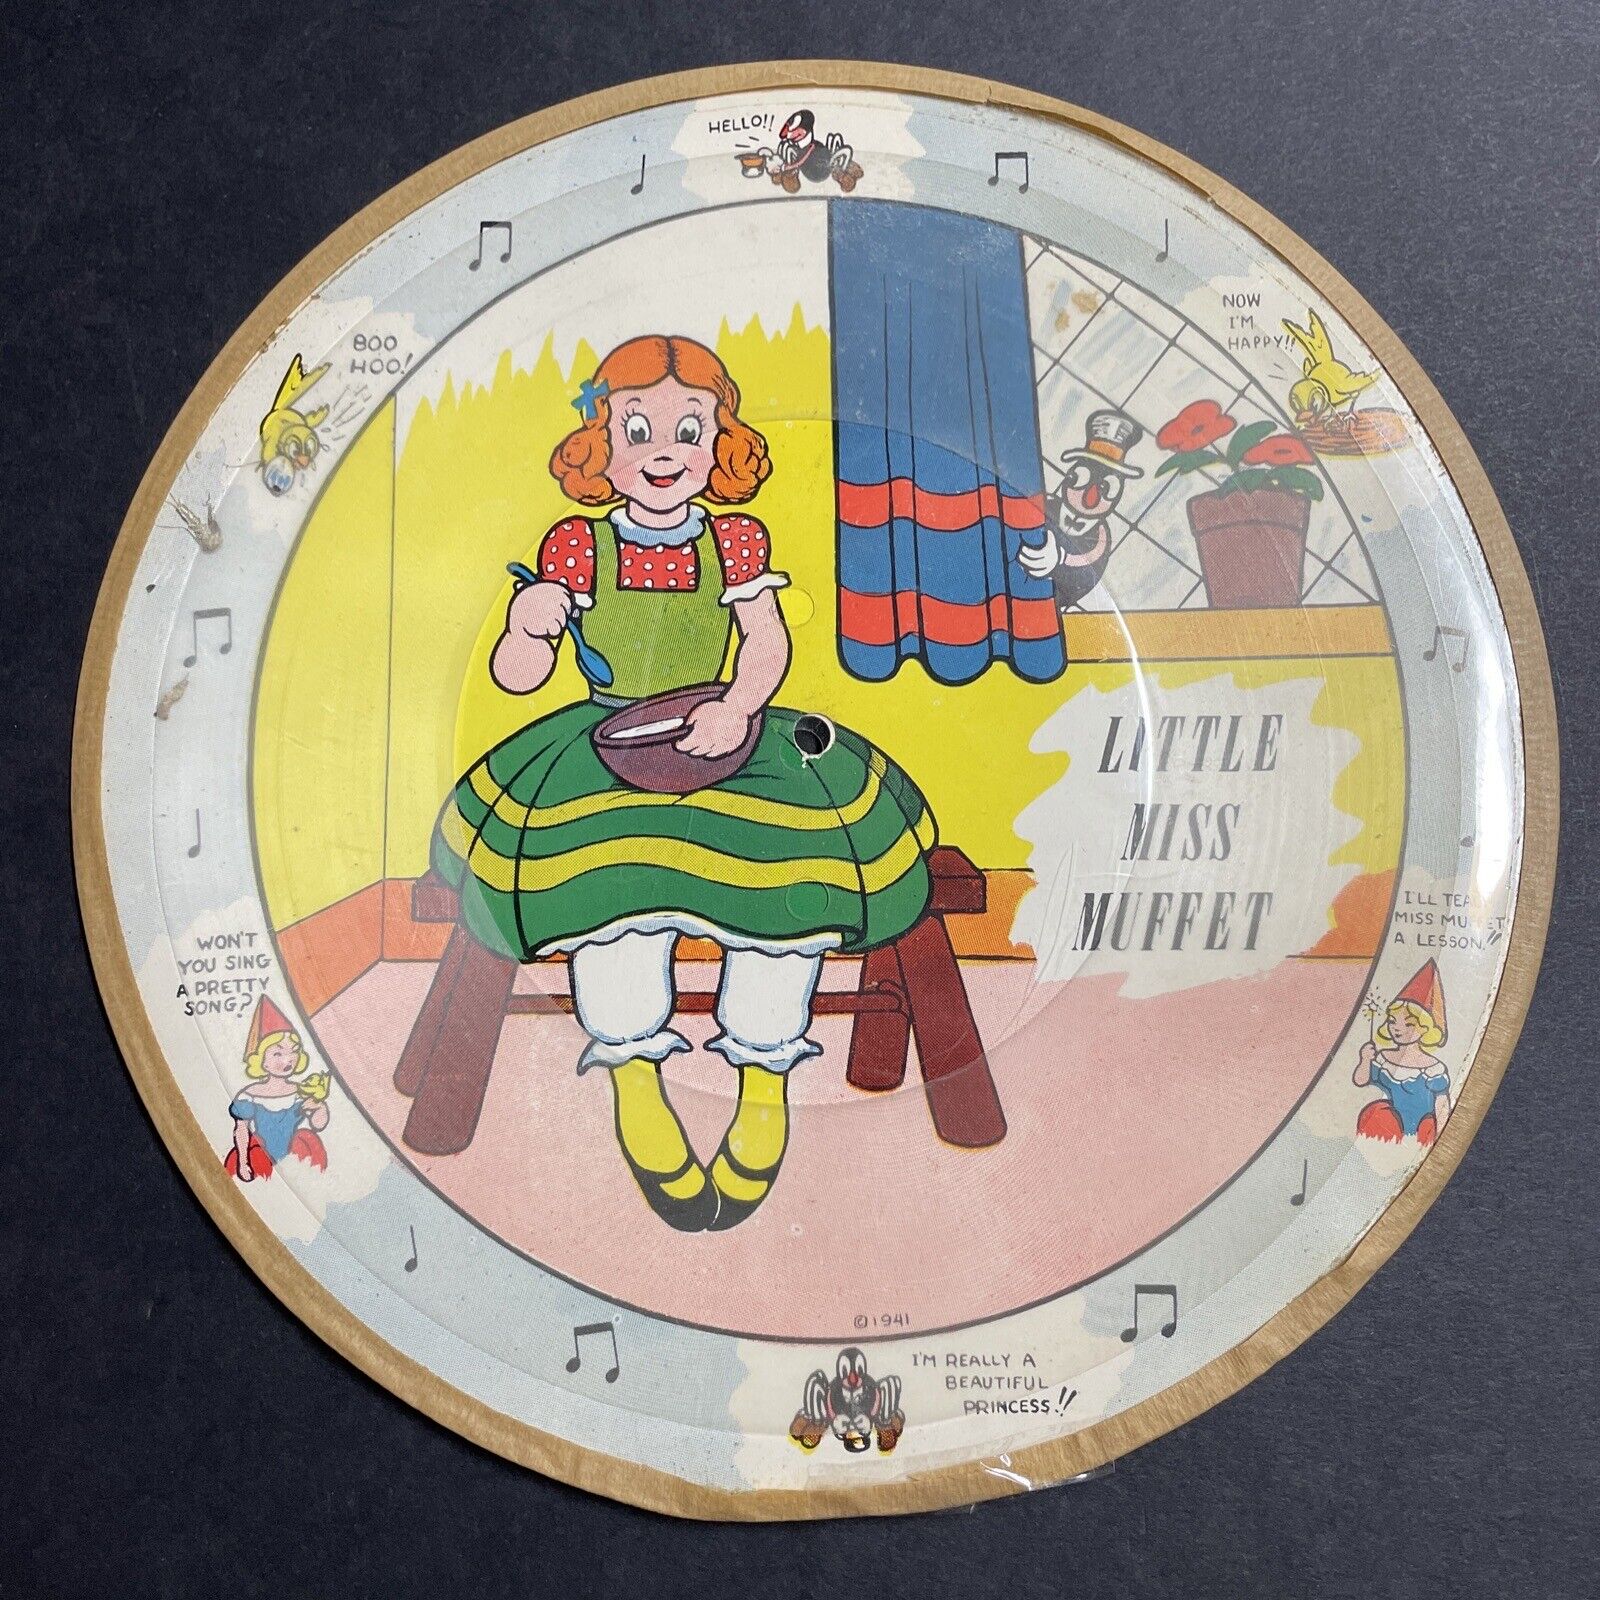 Little Miss Muffet 78rpm Antique 1941 Cardboard Phonograph Gramophone Record